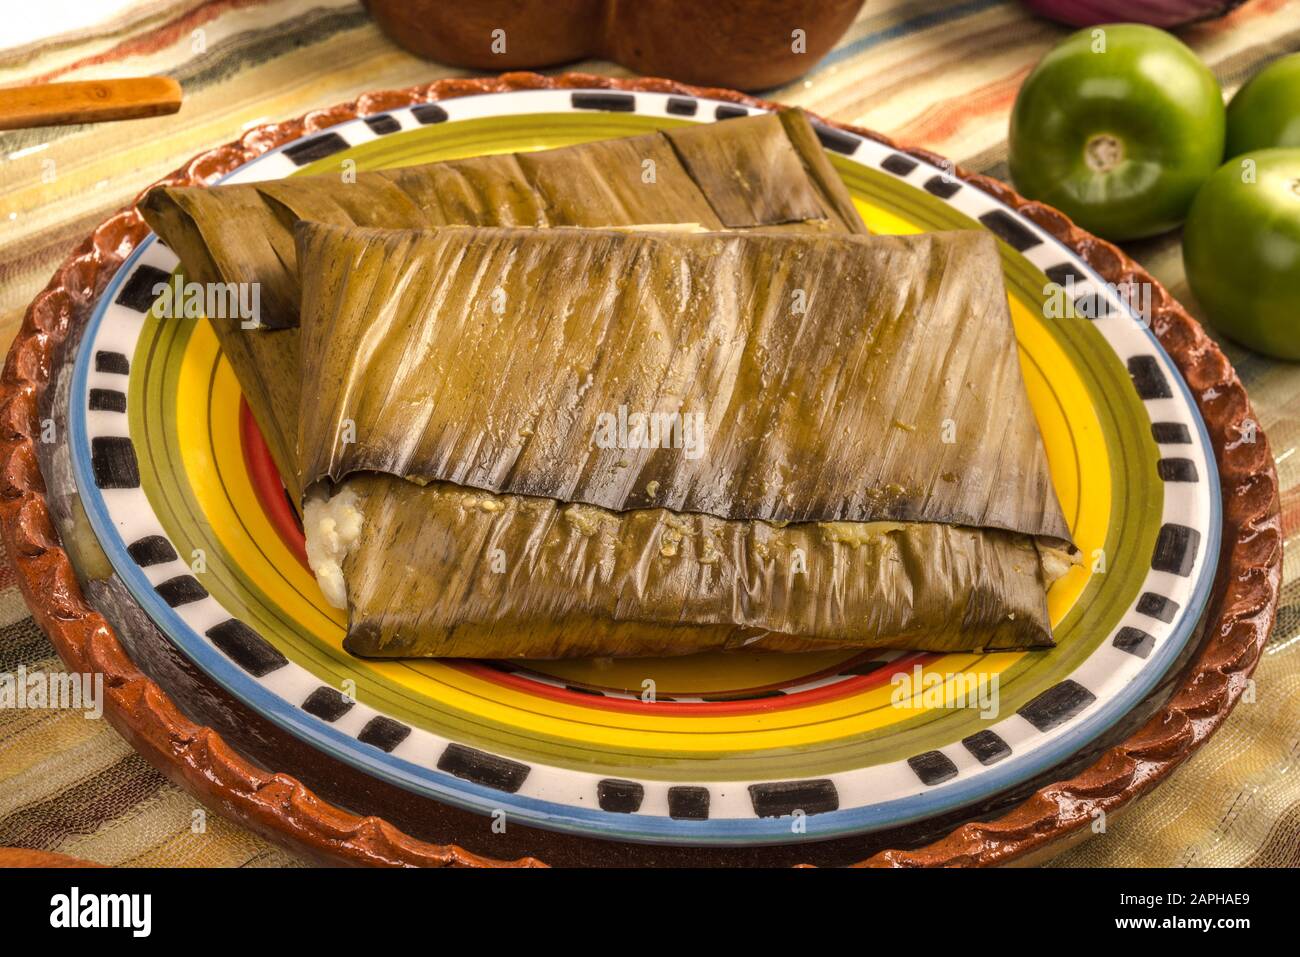 Tamales Oaxaqueños, Mexican dish made with corn dough, chicken or pork and chili, wrapped in a banana leaves. Stock Photo